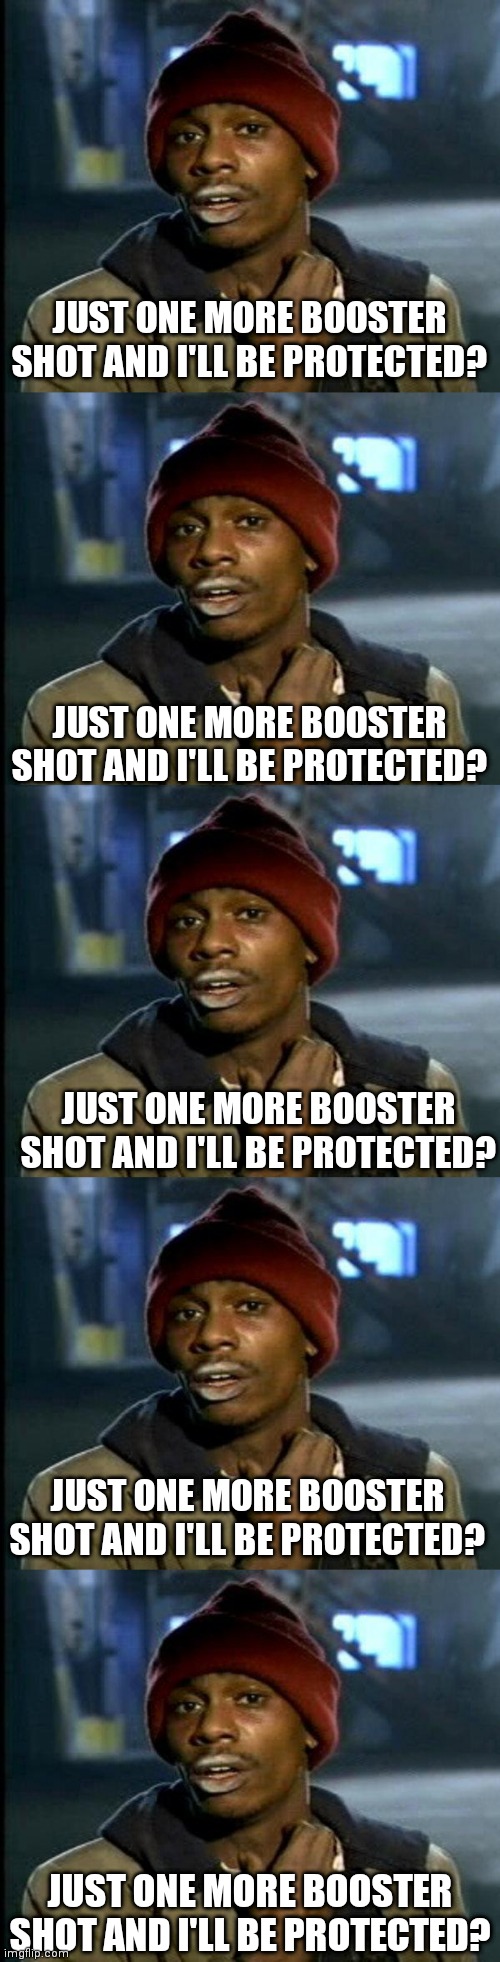 JUST ONE MORE BOOSTER SHOT AND I'LL BE PROTECTED? JUST ONE MORE BOOSTER SHOT AND I'LL BE PROTECTED? JUST ONE MORE BOOSTER SHOT AND I'LL BE PROTECTED? JUST ONE MORE BOOSTER SHOT AND I'LL BE PROTECTED? JUST ONE MORE BOOSTER SHOT AND I'LL BE PROTECTED? | image tagged in dave chappelle | made w/ Imgflip meme maker